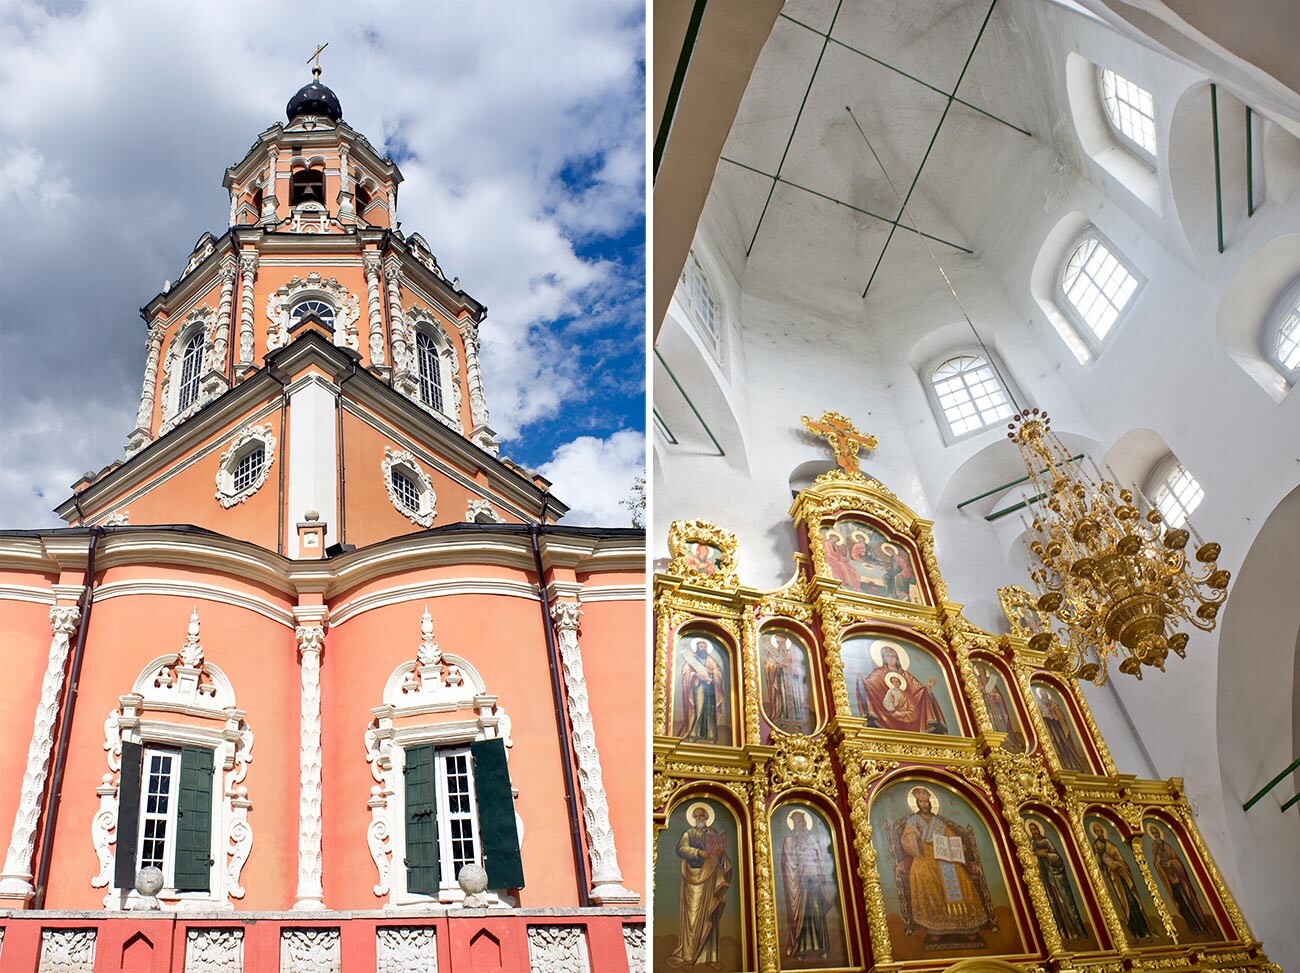 Left: Ubory. Church of the Miraculous Icon of the Savior, southwest view. 
Right: Interior view with icon screen & tower vault. August 16, 2013